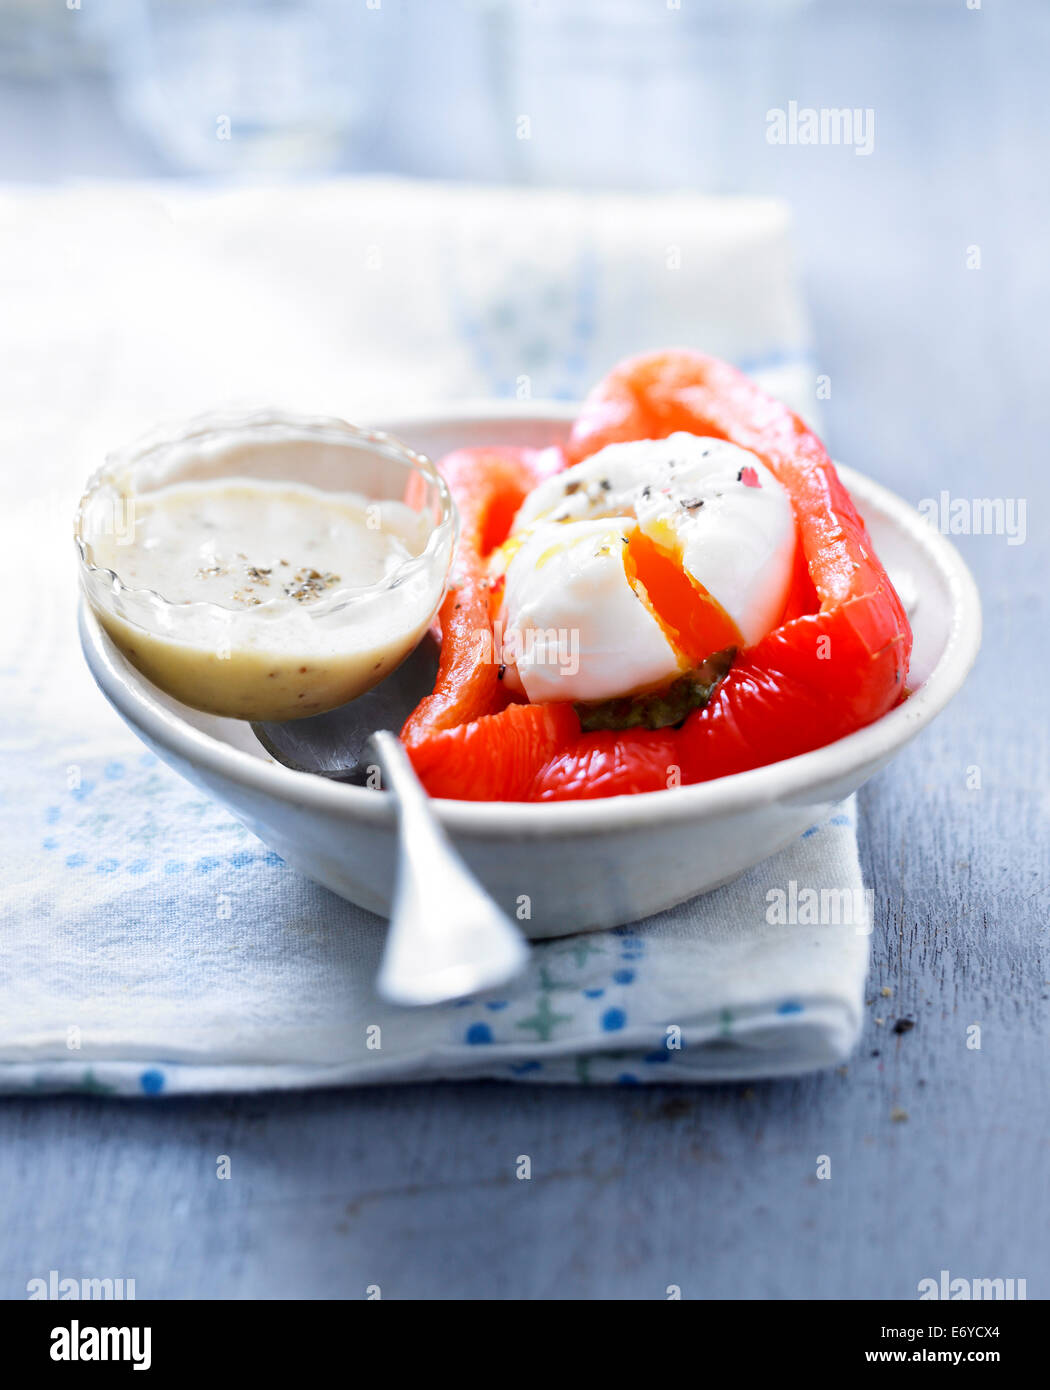 Soft-boiled egg in half a red bell pepper Stock Photo